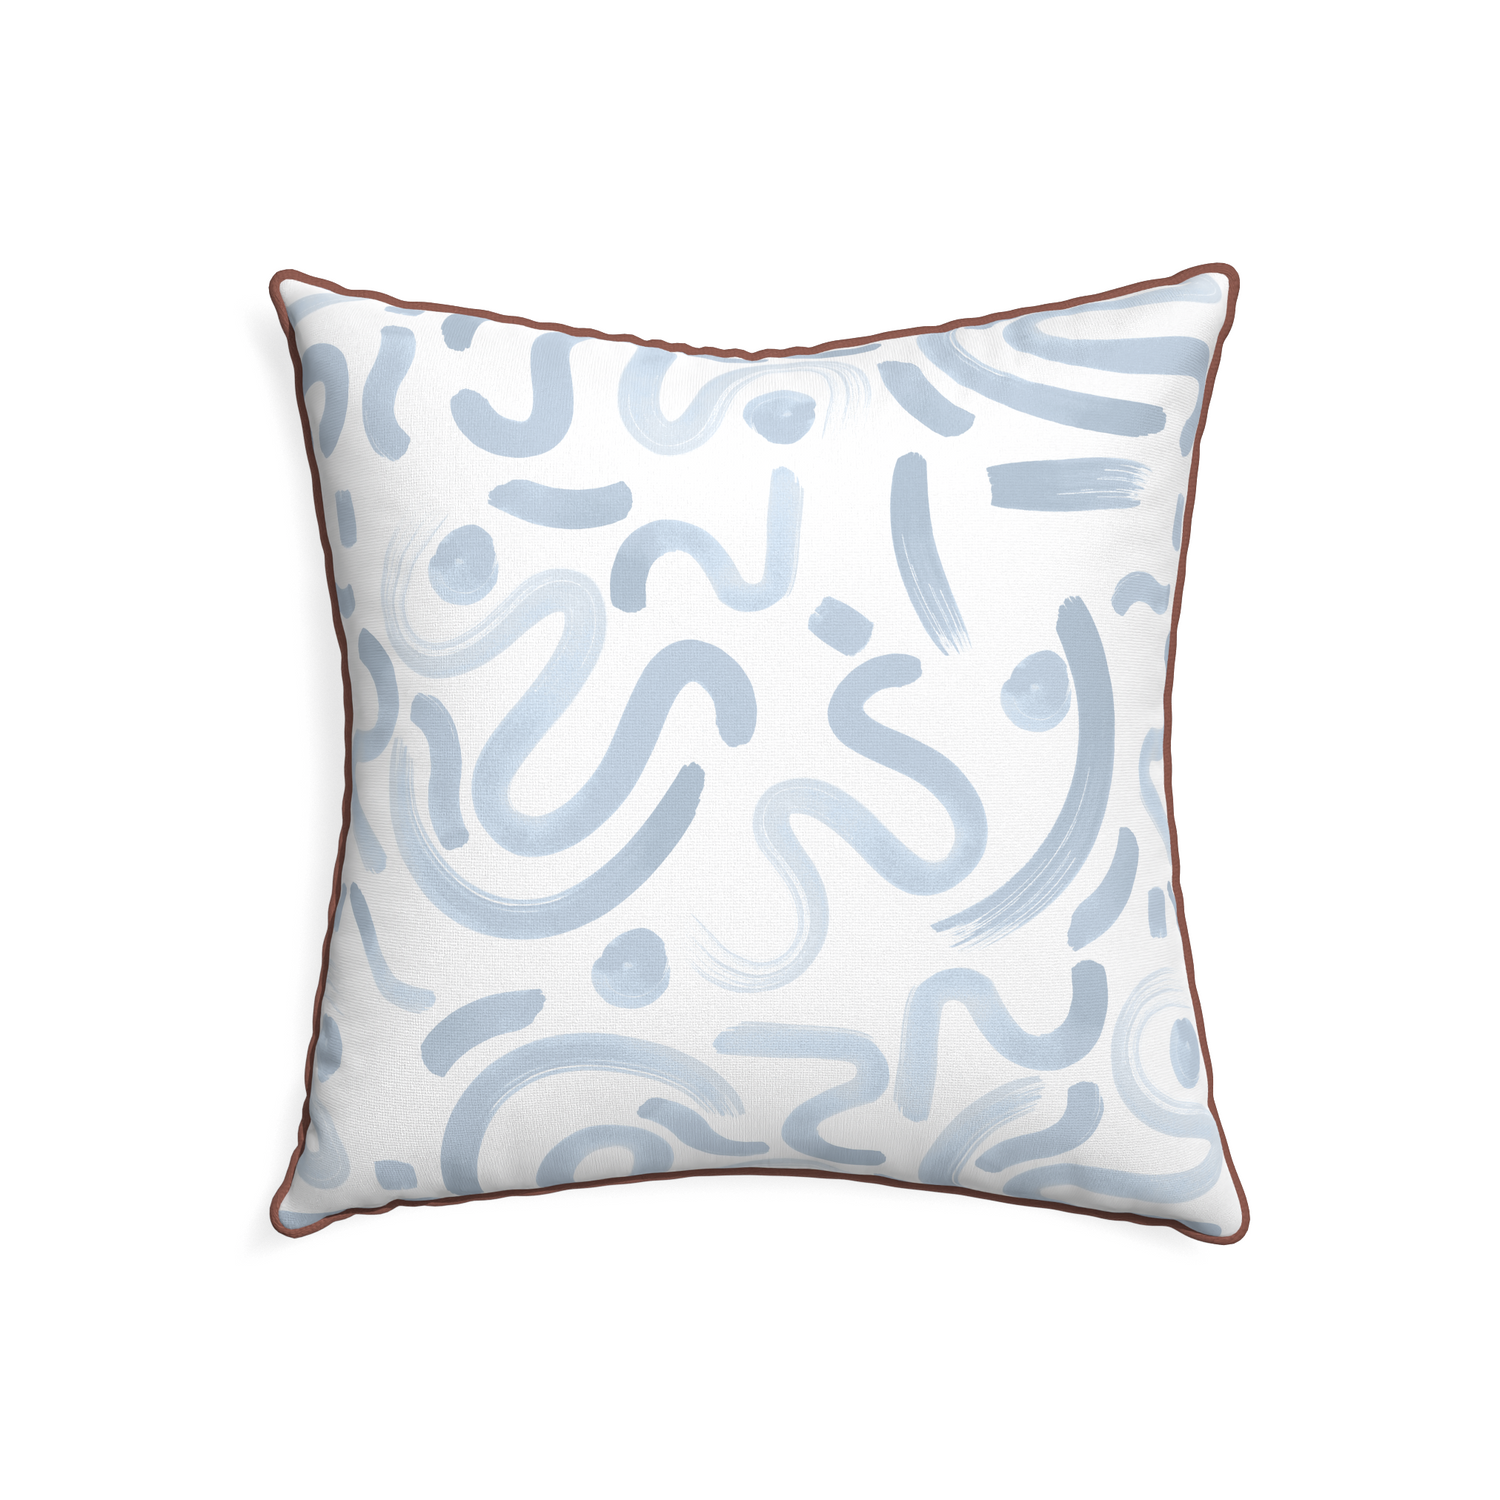 22-square hockney sky custom pillow with w piping on white background